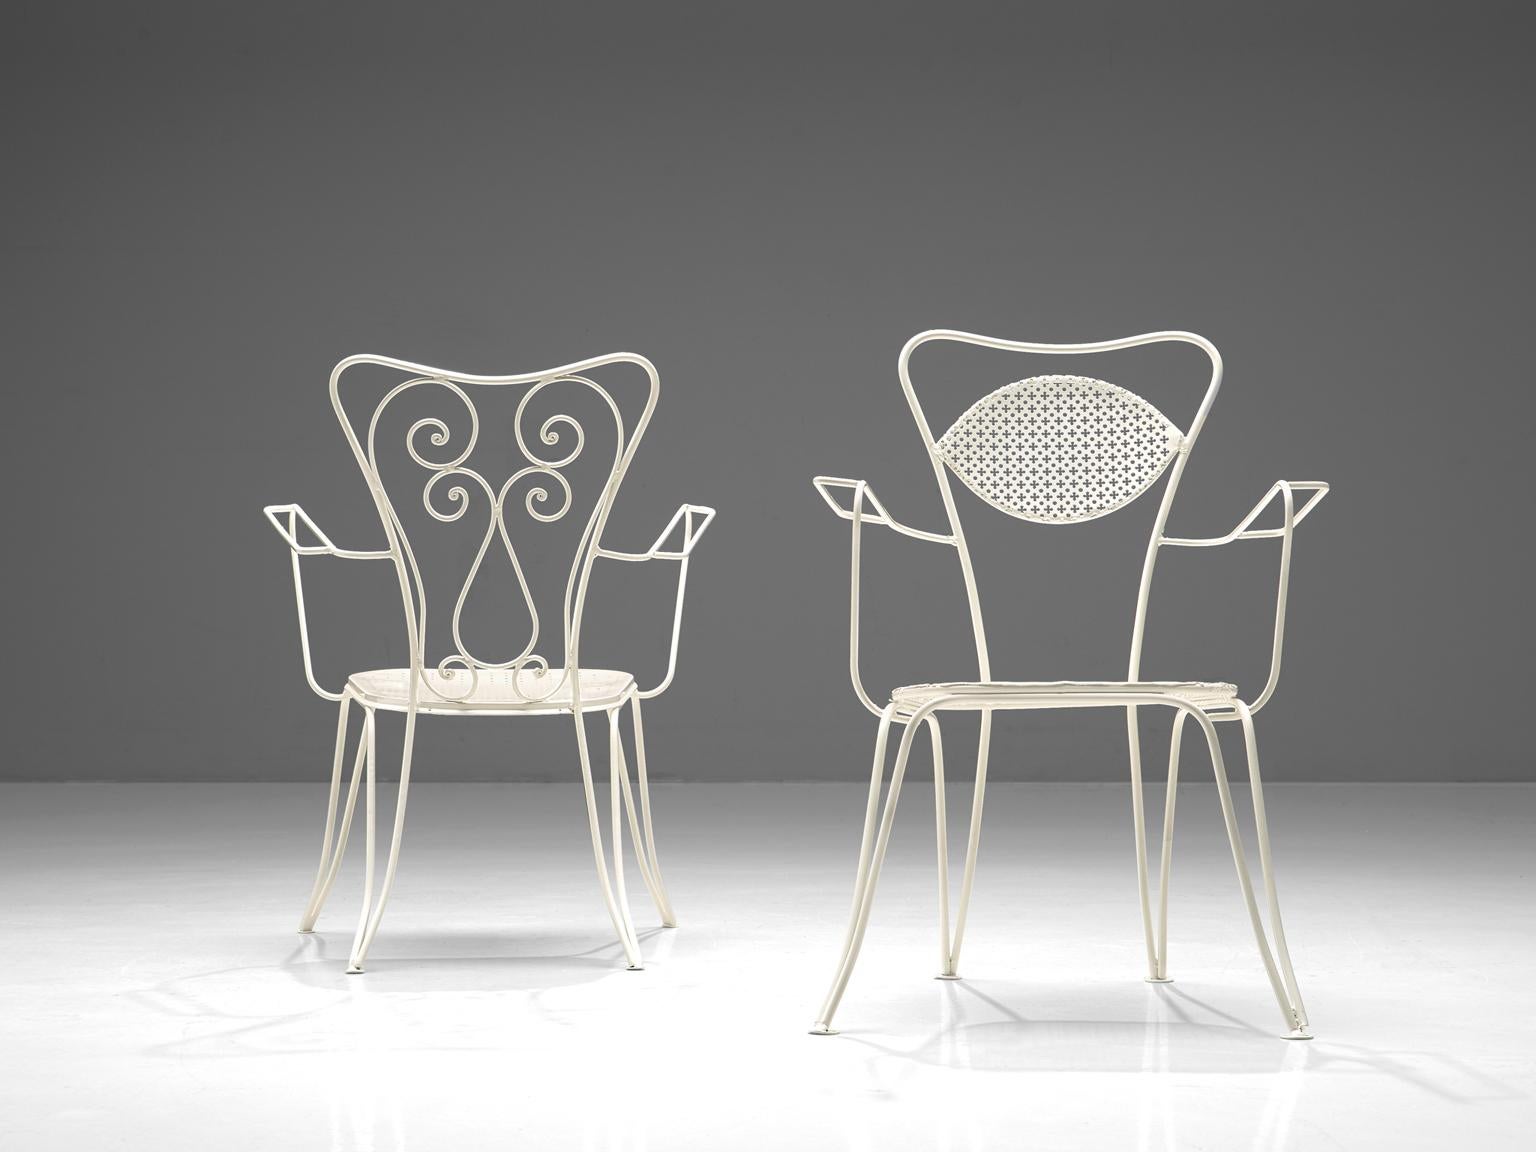 Dining patio chairs, white colored metal, Italy, 1960s.

Elegant metal chairs in white. The chairs have an elegant, bold design, as is quintessential of Italian patio chairs. Curved shapes and thin armrests form the frame combined with a mesh seat